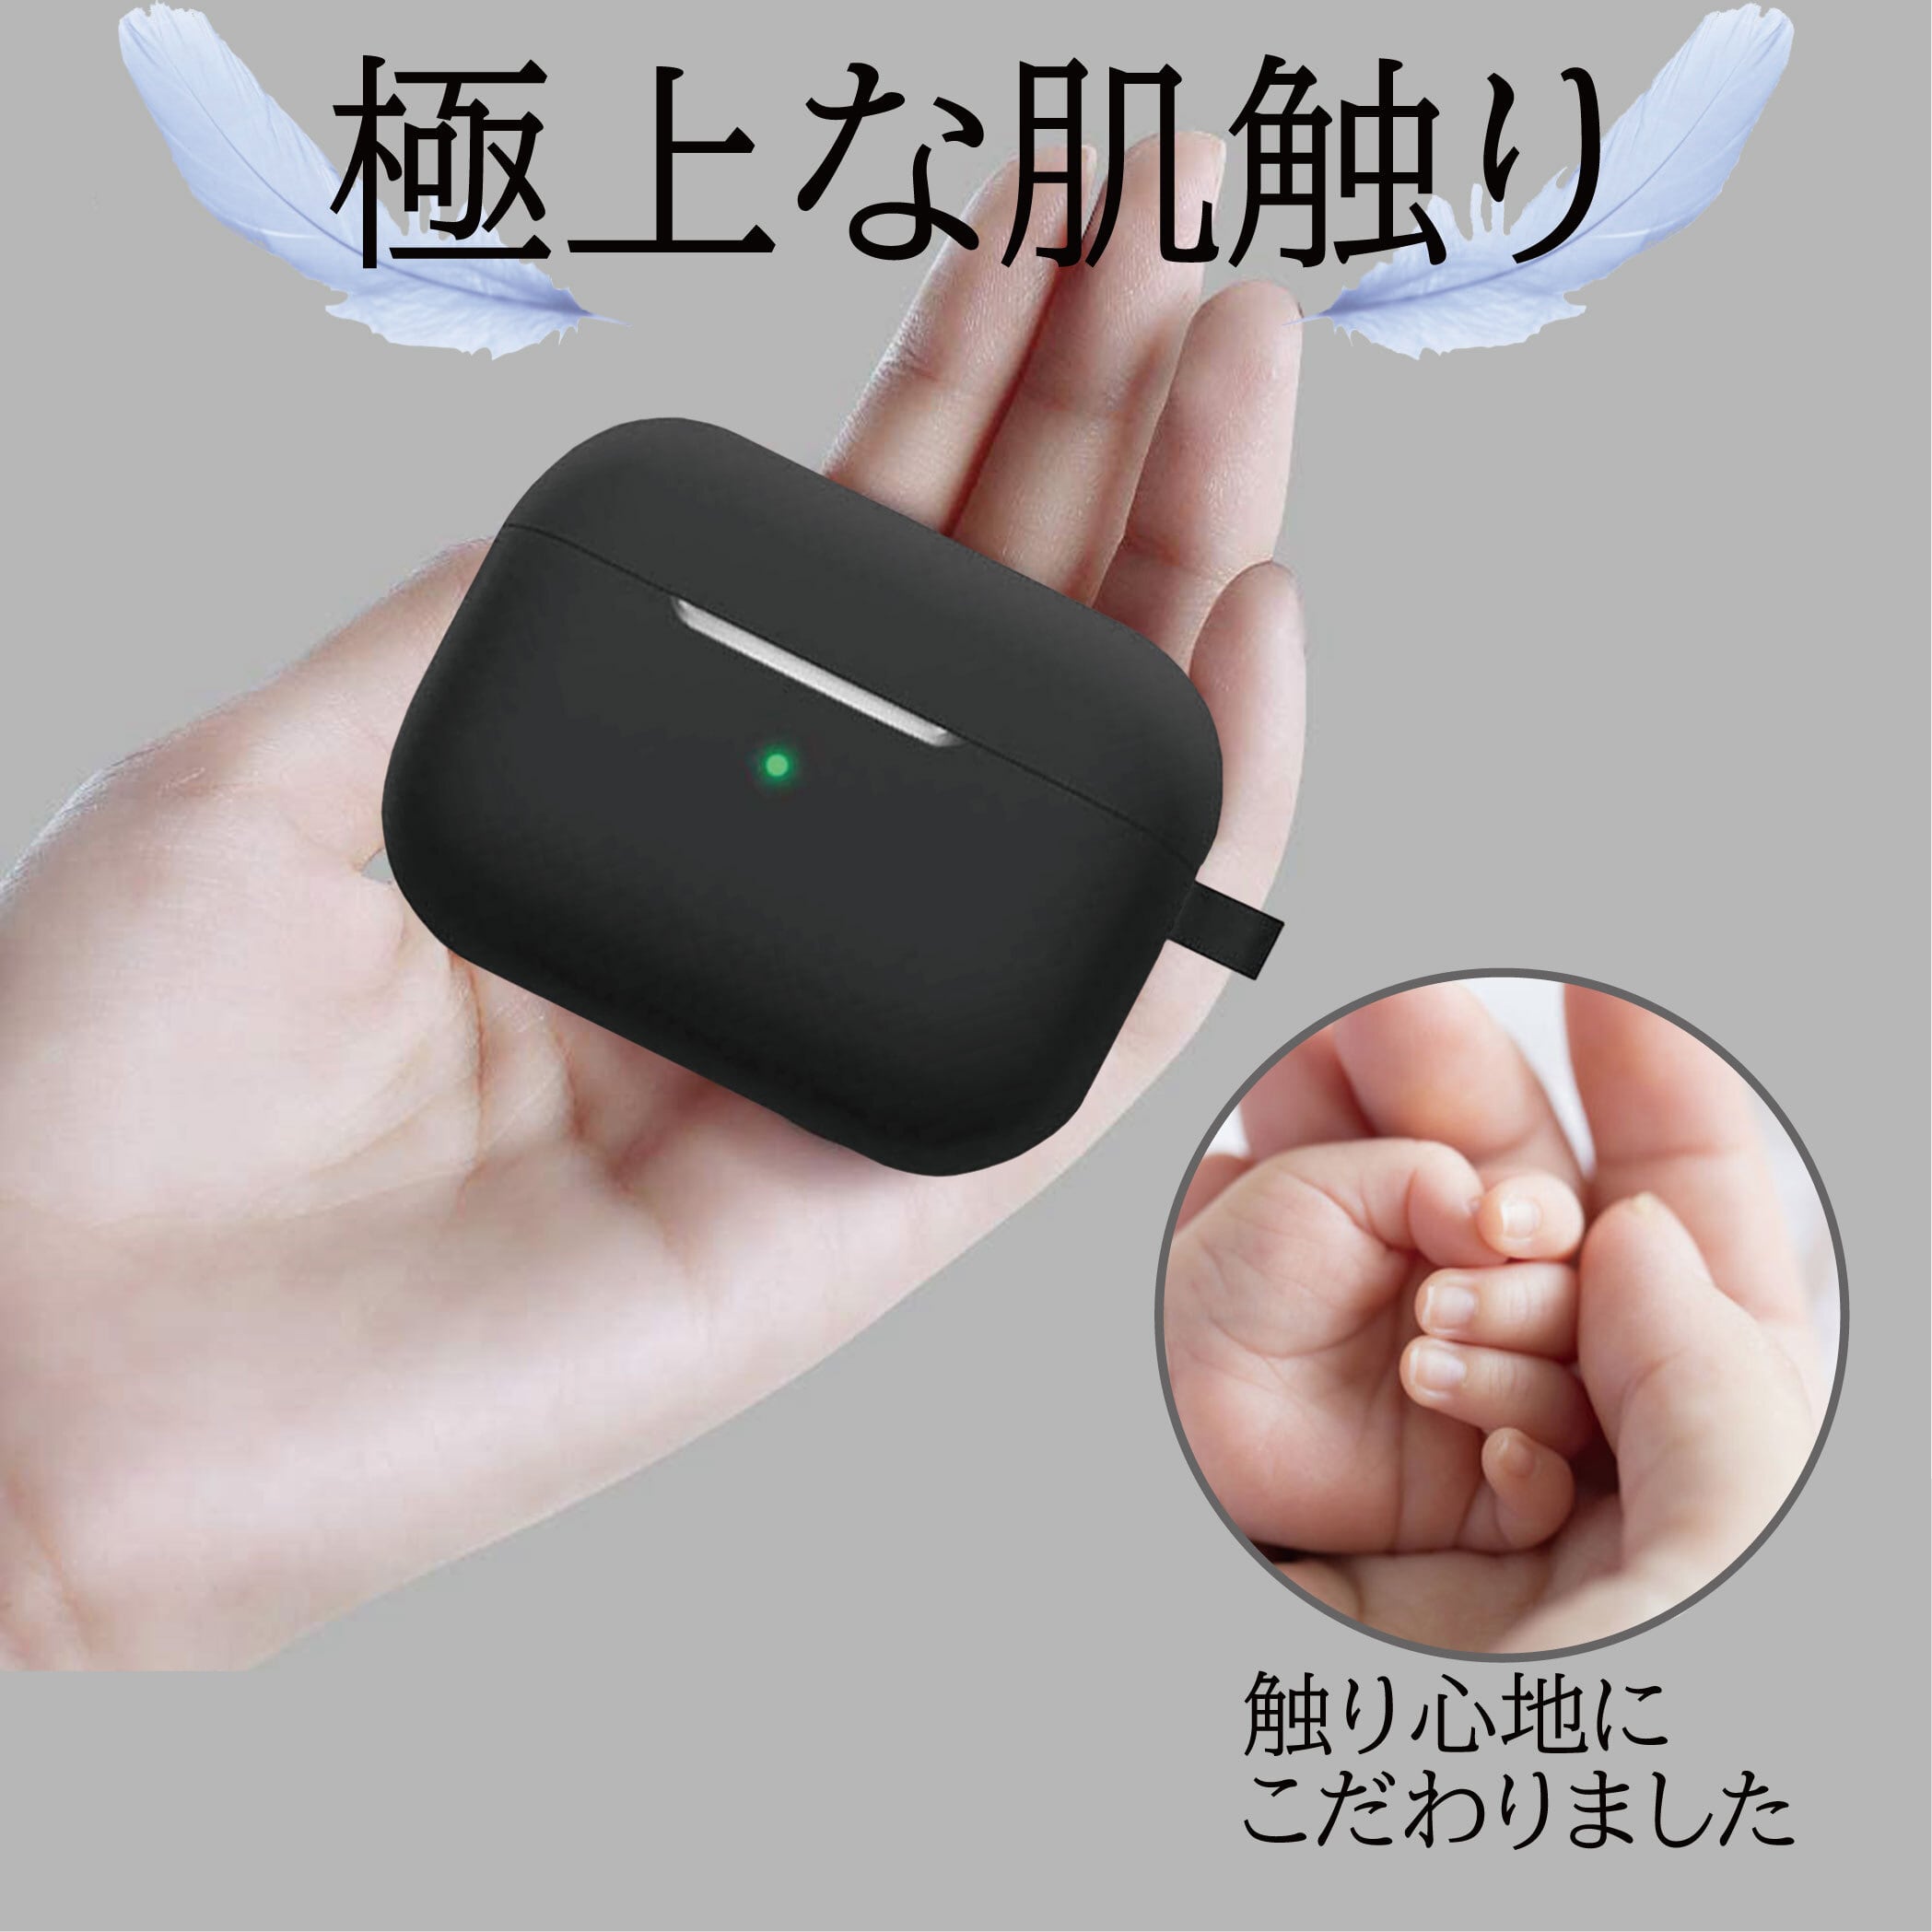 AirPods　③、④、⑦、⑧、⑨　5点セット